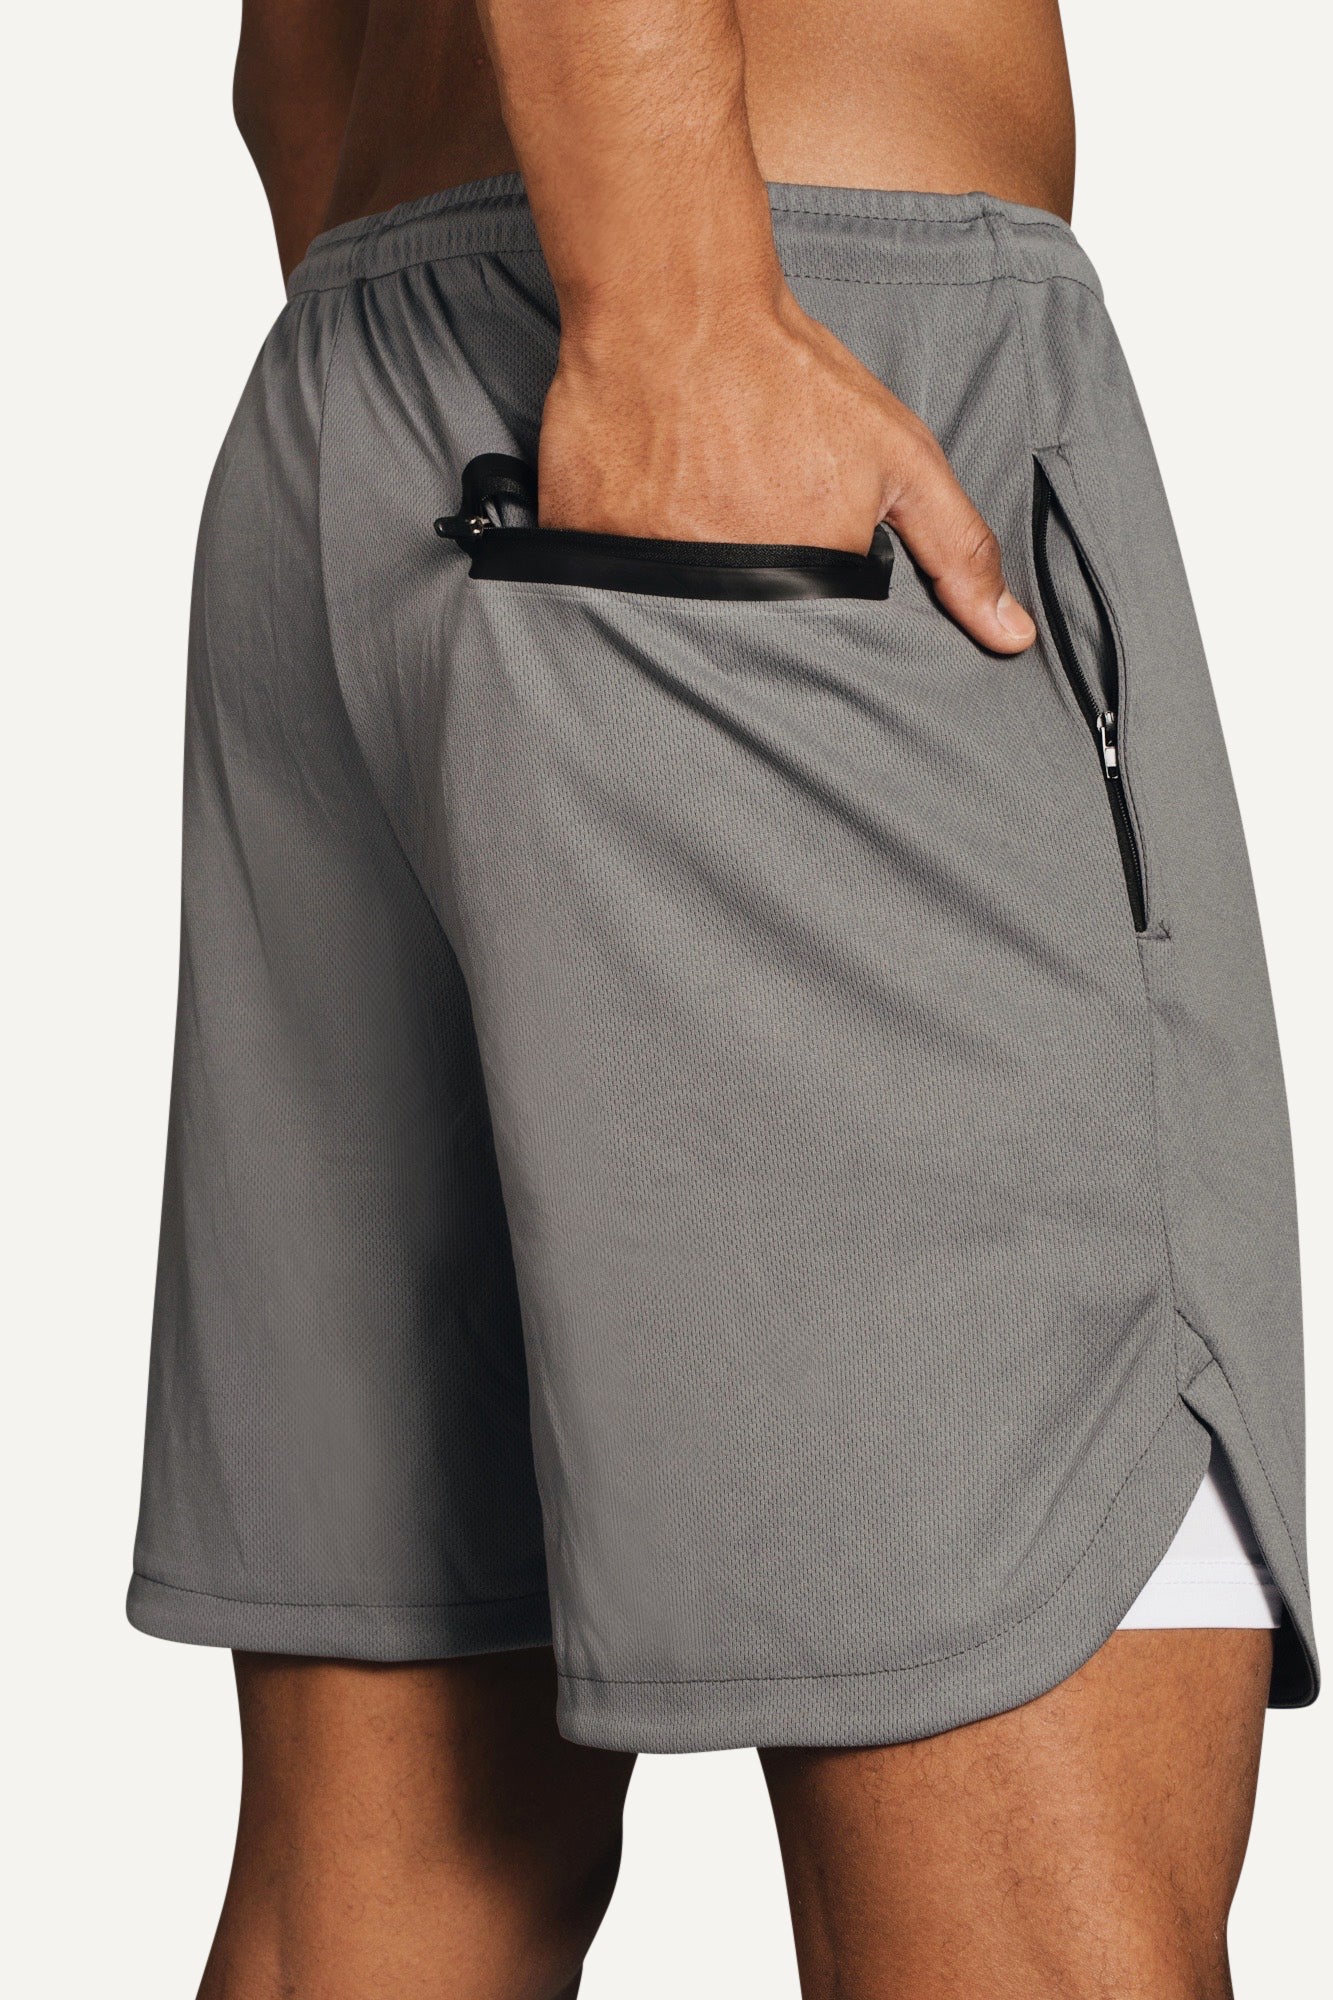 Limitless 2-in-1 Shorts